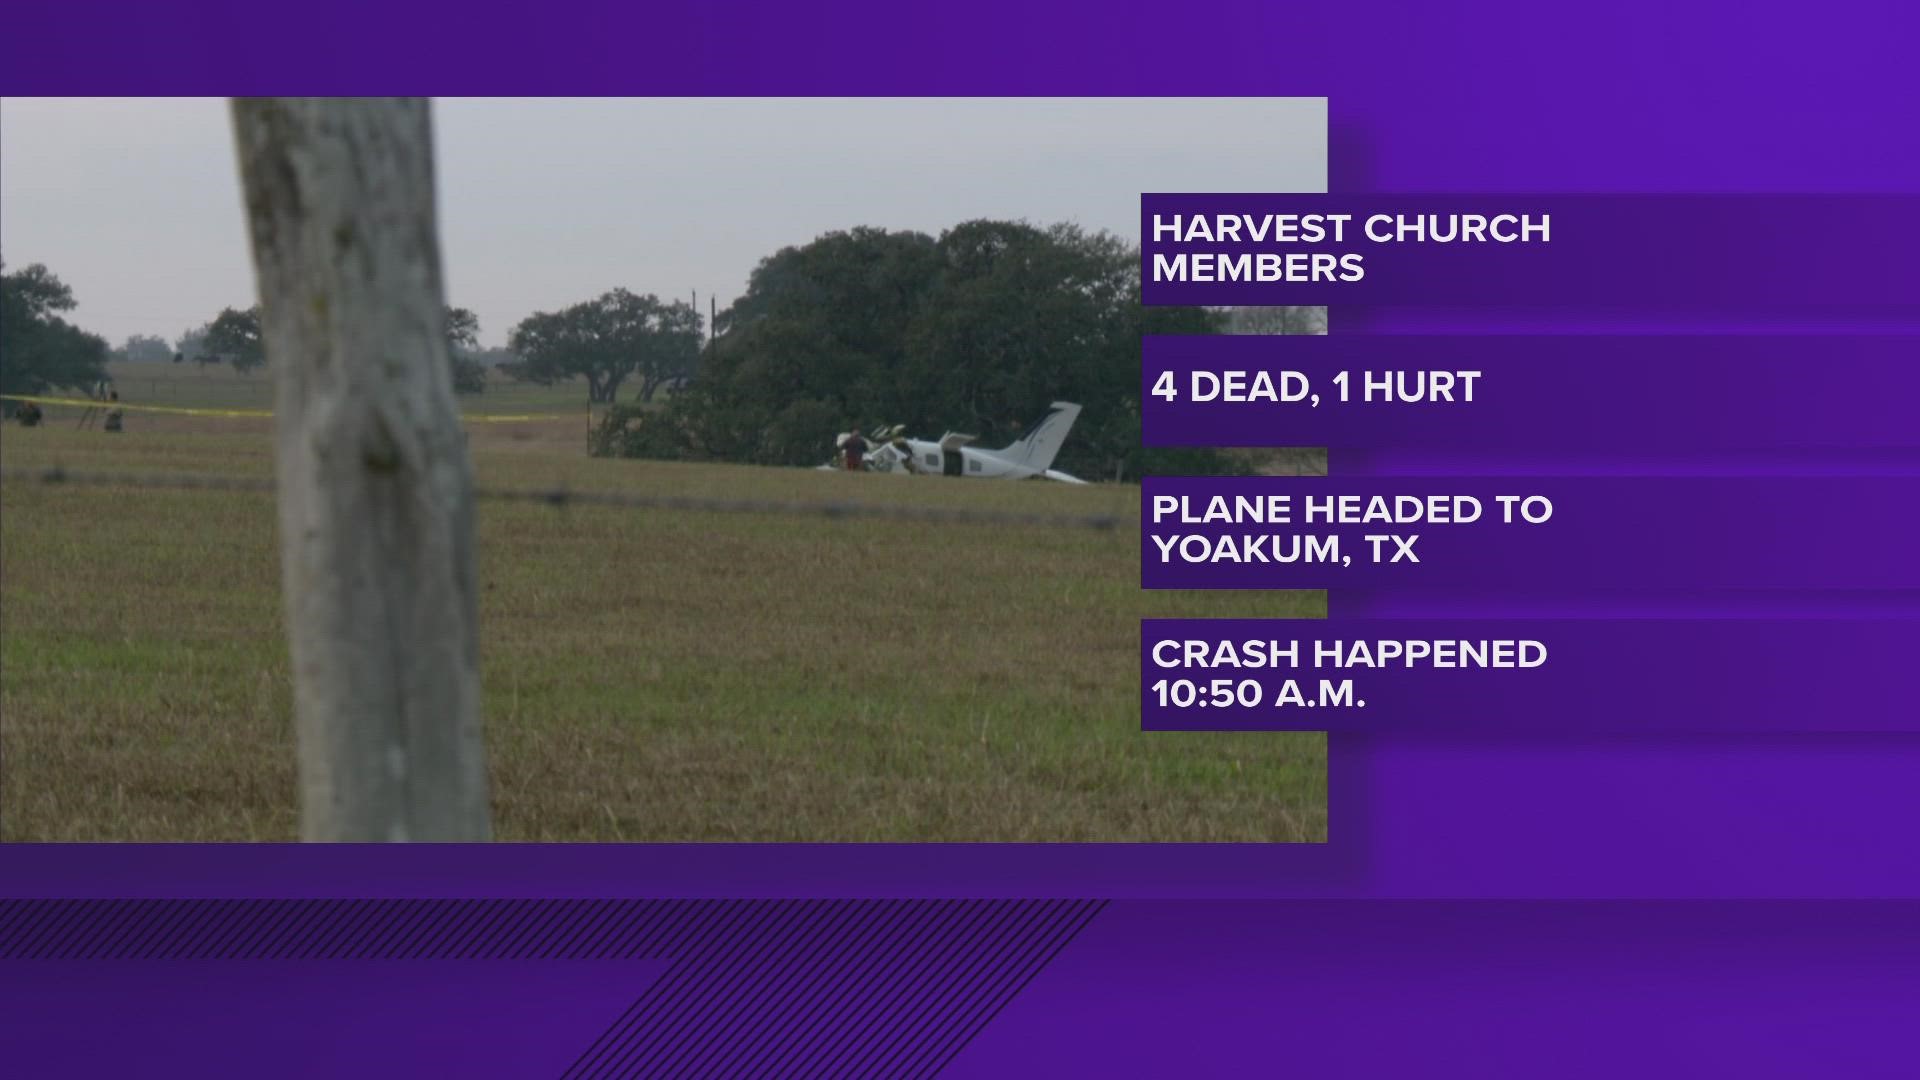 Harvest Church in Germantown, Tennessee, has been posting updates on its lead pastor, who was severely injured Tuesday when the small plane crashed in Yoakum, Texas.